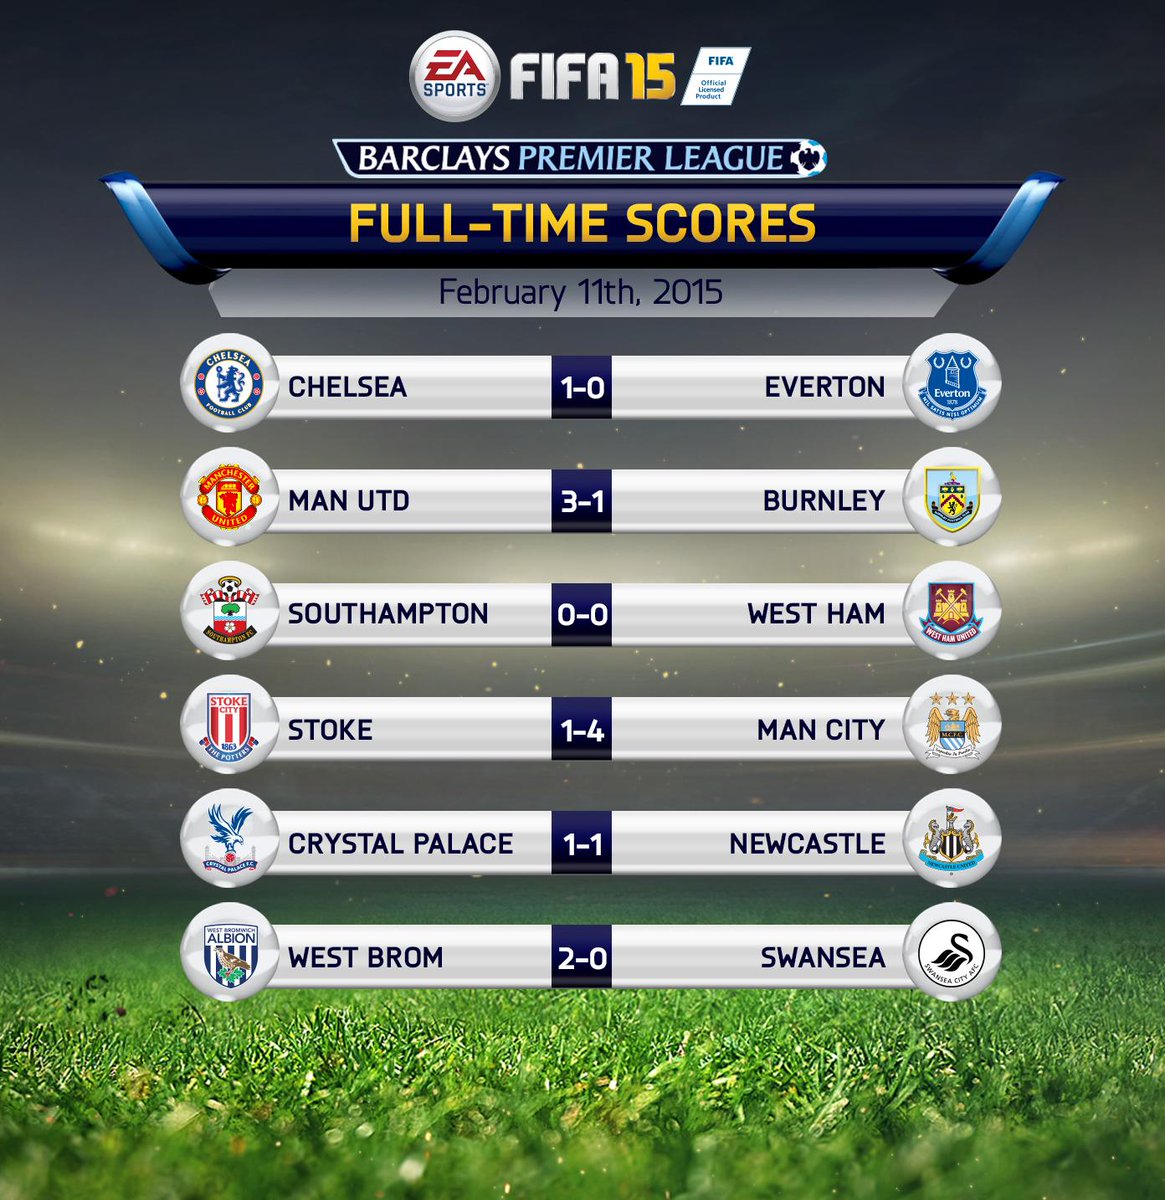 fifa results today